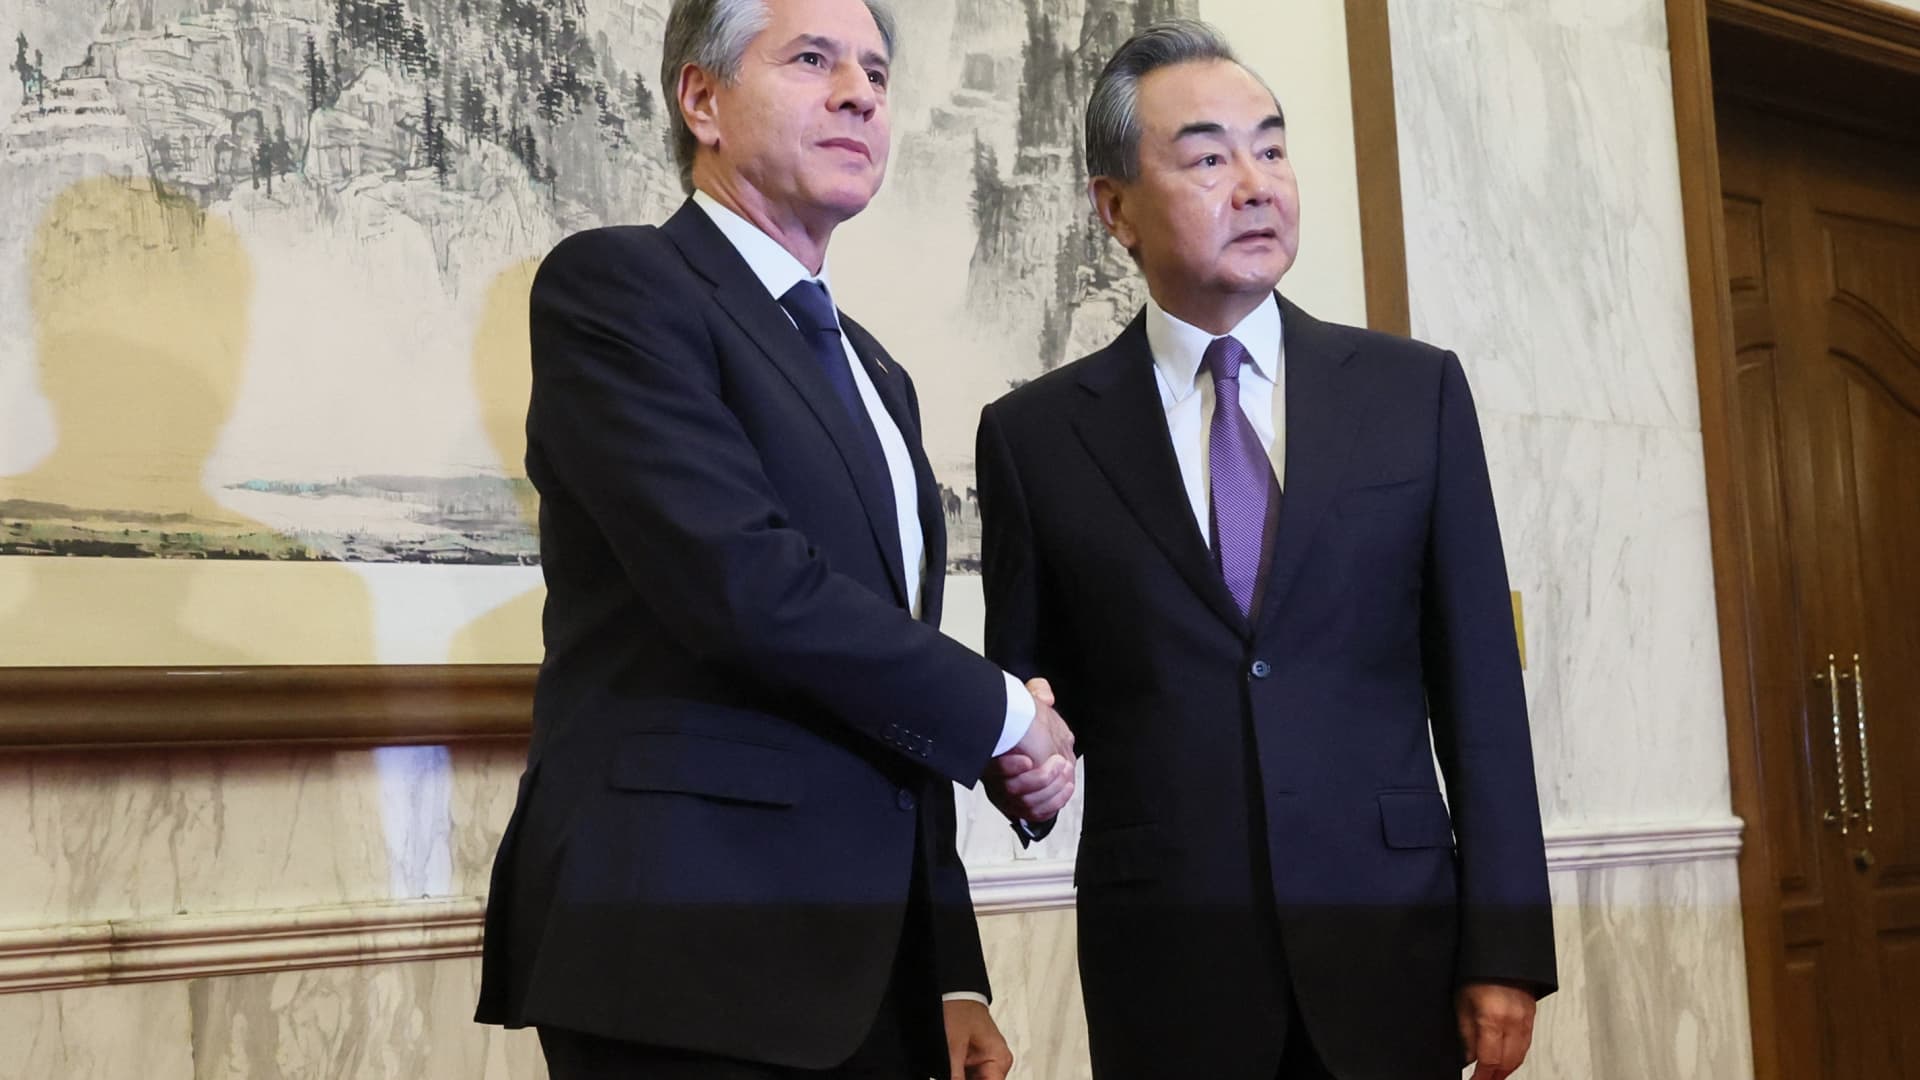 US Secretary of State Antony Blinken (L) shakes hands with China's Director of the Office of the Central Foreign Affairs Commission Wang Yi at the Diaoyutai State Guesthouse in Beijing on June 19, 2023. (Photo by Leah MILLIS / POOL / AFP) (Photo by LEAH MILLIS/POOL/AFP via Getty Images)